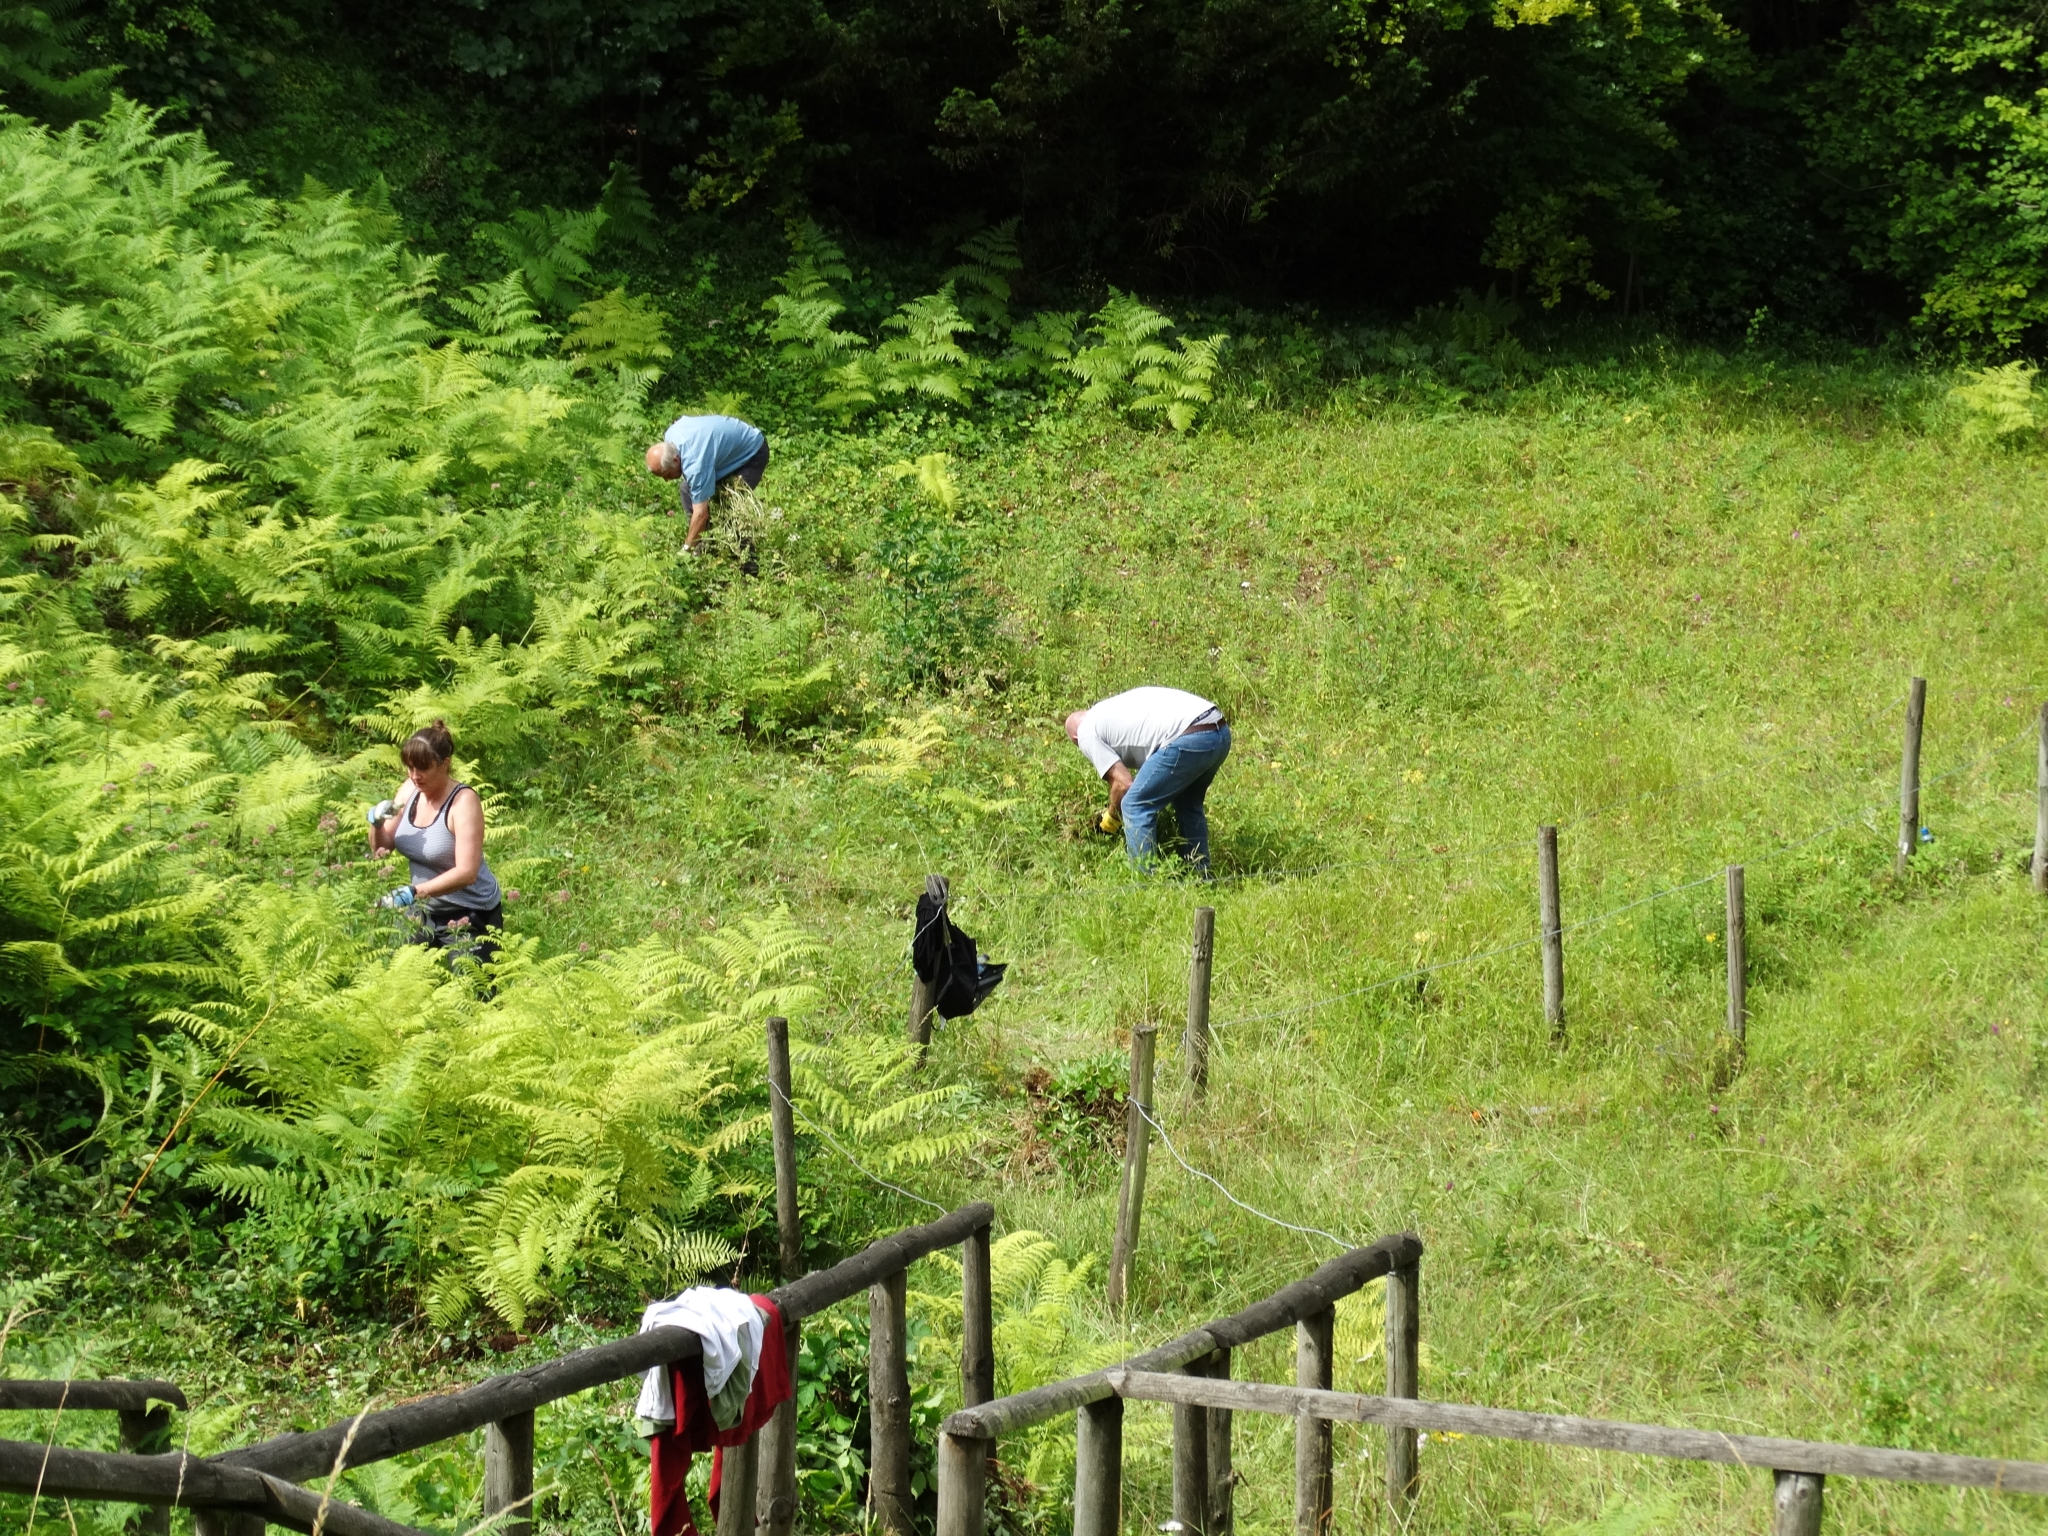 A photo from the FoTF Conservation Event - July 2019 - Weeding at Rex Graham Reserve : Volunteers weed at Rex Graham Reserve